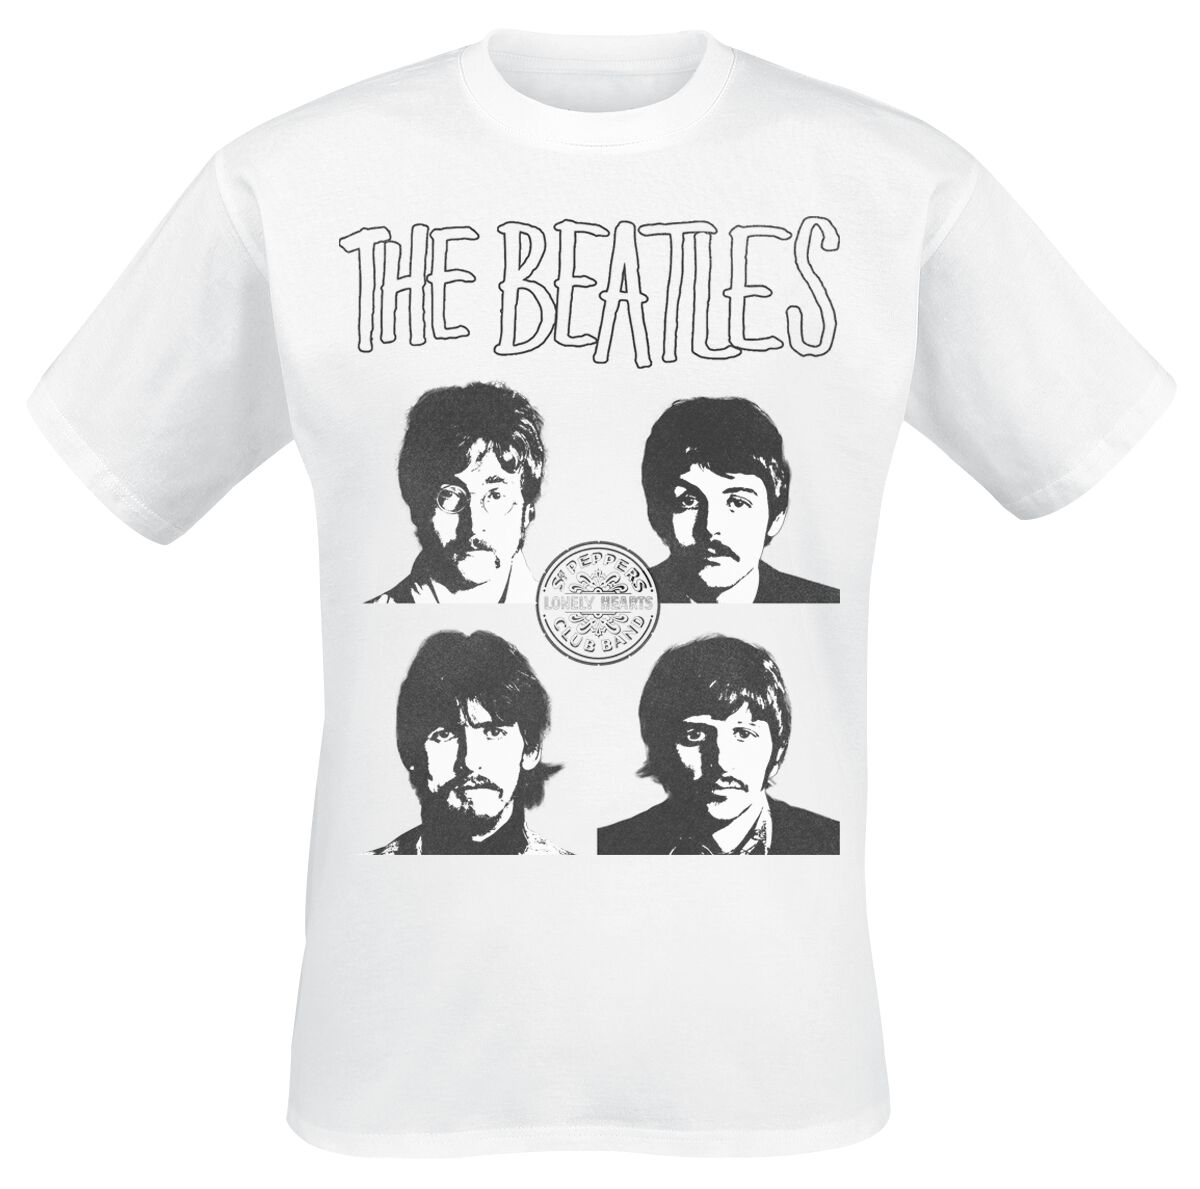 The Beatles Sgt. Peppers Portrais T-Shirt weiß in S